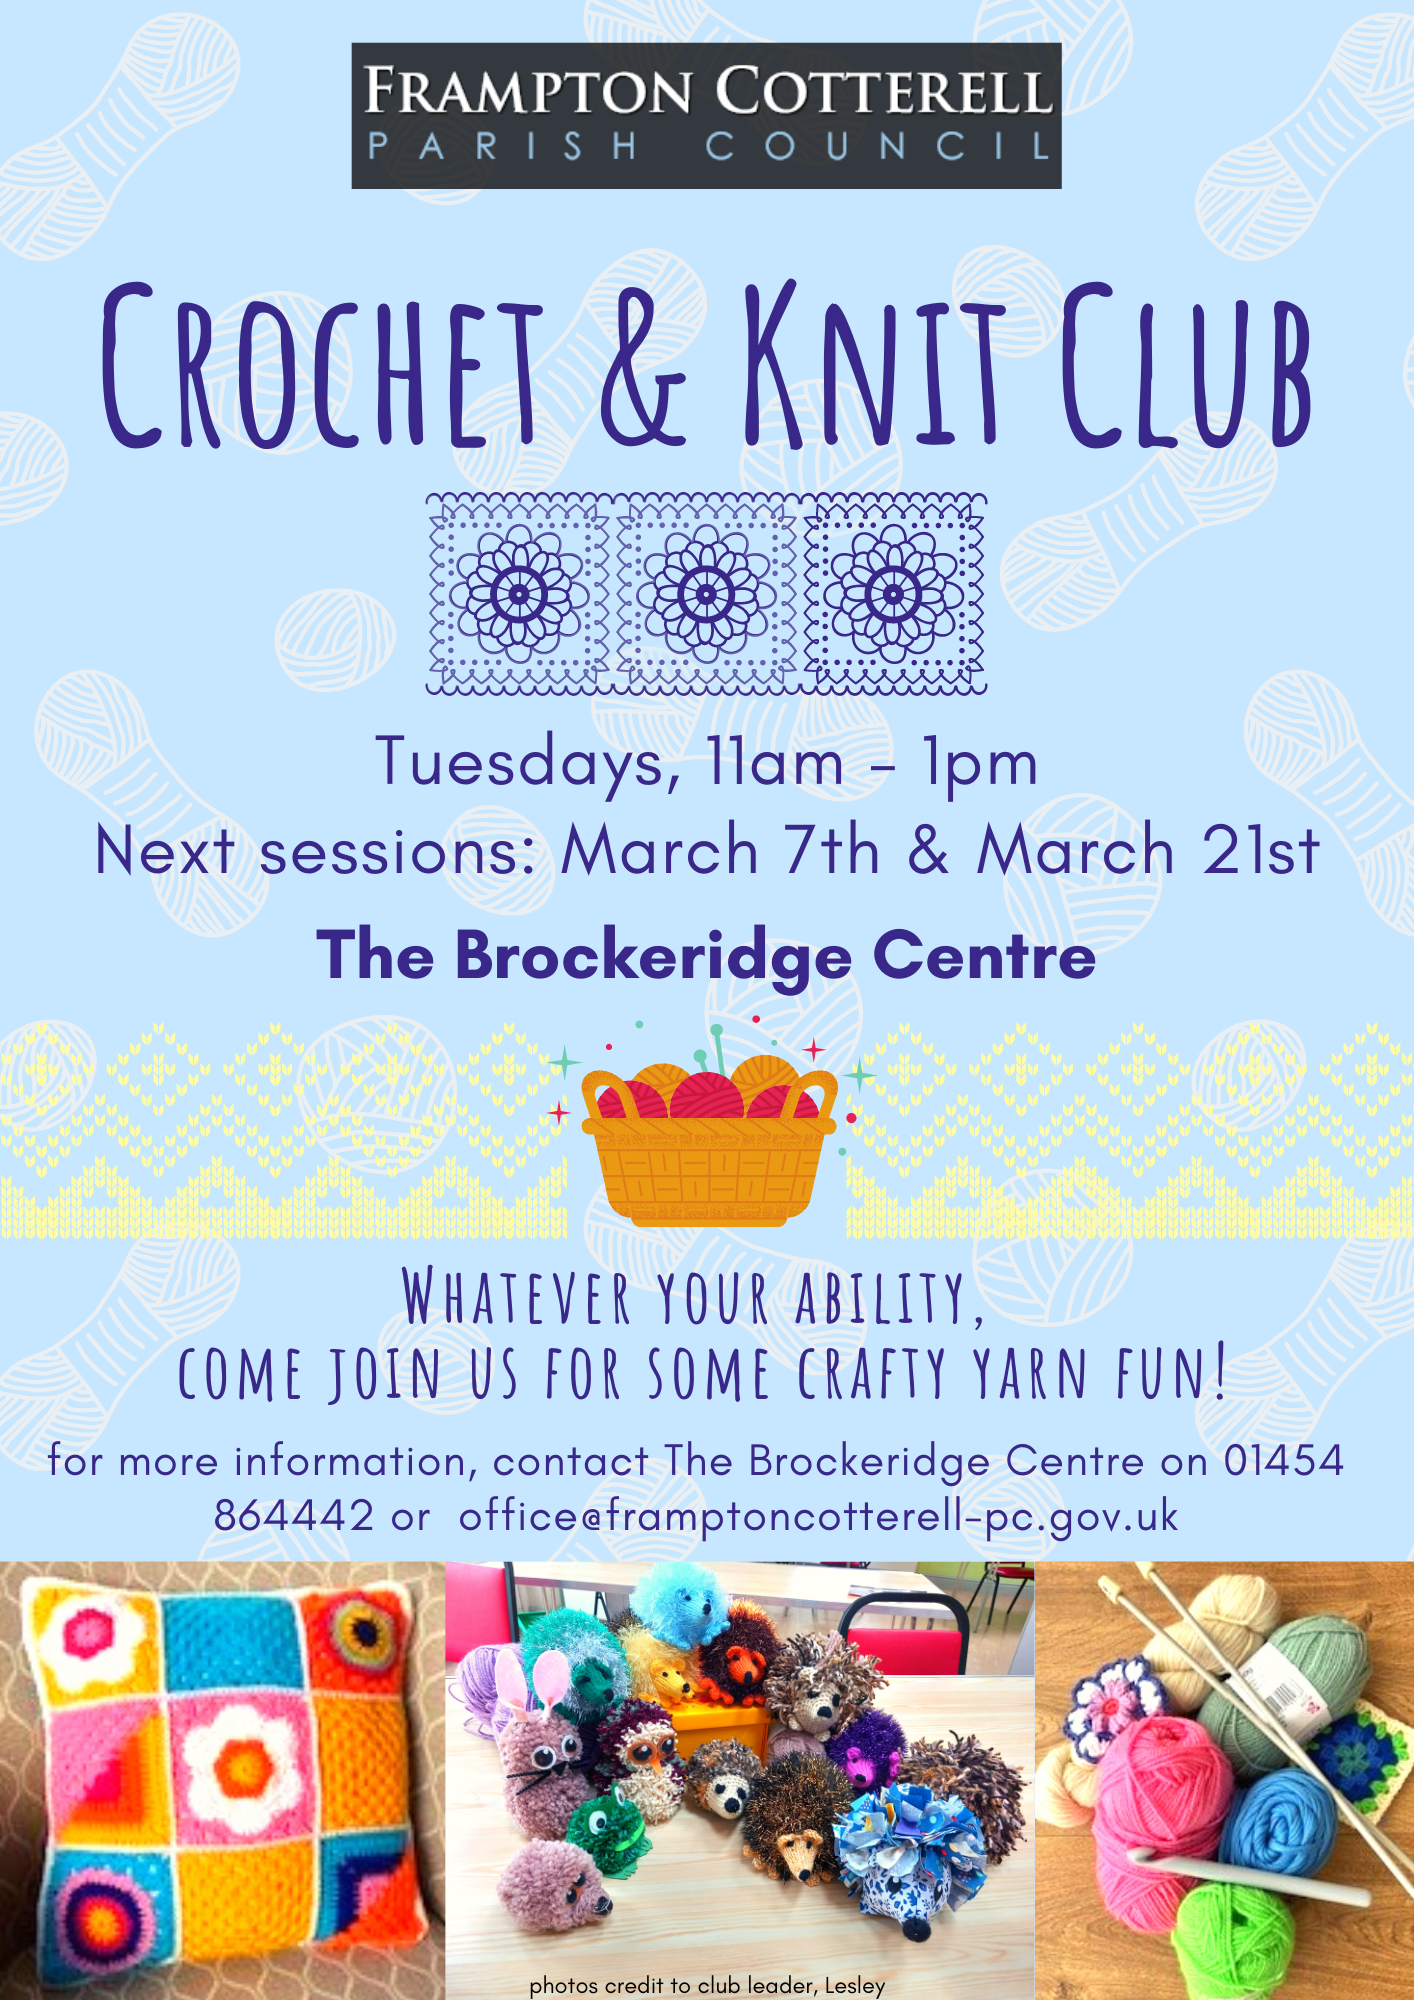 Frampton Cotterell Parish Council / Crochet & Knit Club / Tuesdays, 11am - 1pm / Next sessions: March 7th & March 21st / The Brockeridge Centre. / Whatever your ability, come join us for some crafty yarn fun! / for more information, contact The Brockeridge Centre on 01454 864442 or office@framptoncotterell-pc.gov.uk / Photos of crochet and knit projects: a granny square cushion; a collection of yarn craft animals made of crochet, pom poms, knitting, and sewing; a stack of yarn balls with crochet hooks and knitting needles. / Photo credit to club leader, Lesley.